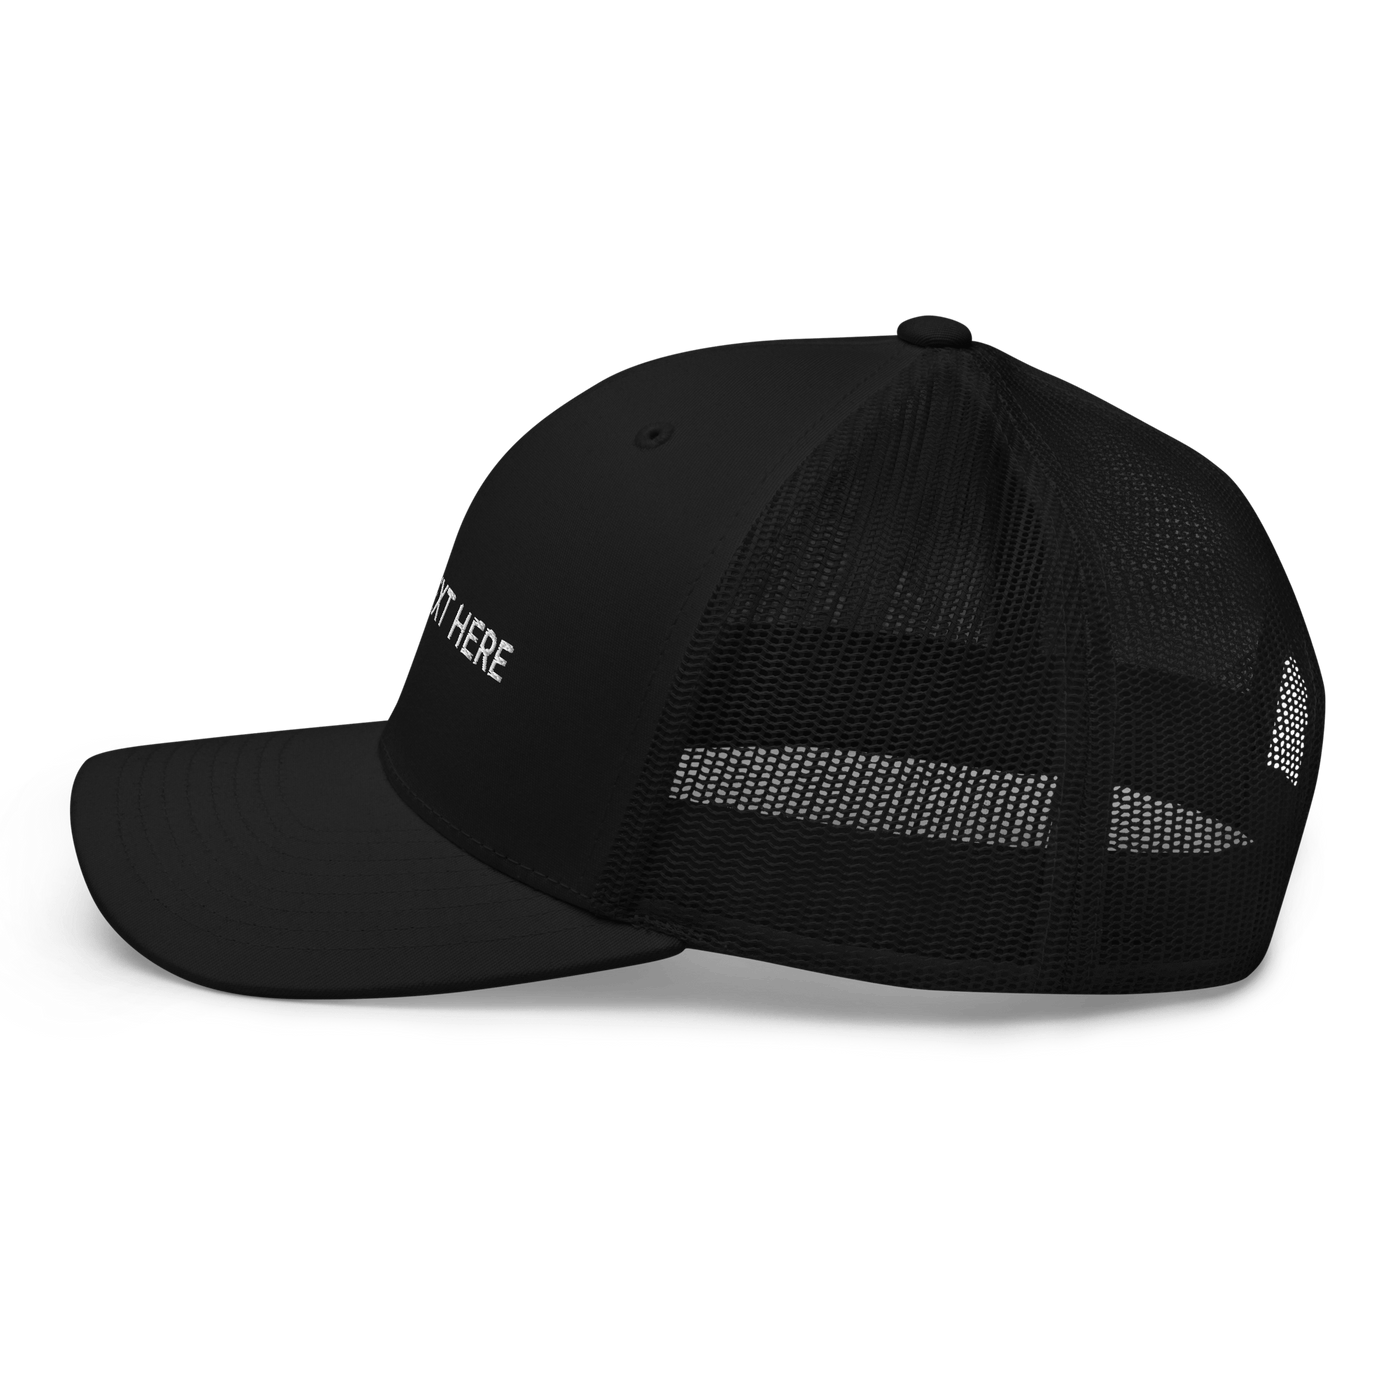 Customize your own Trucker Cap - Black - - Just Another Cap Store